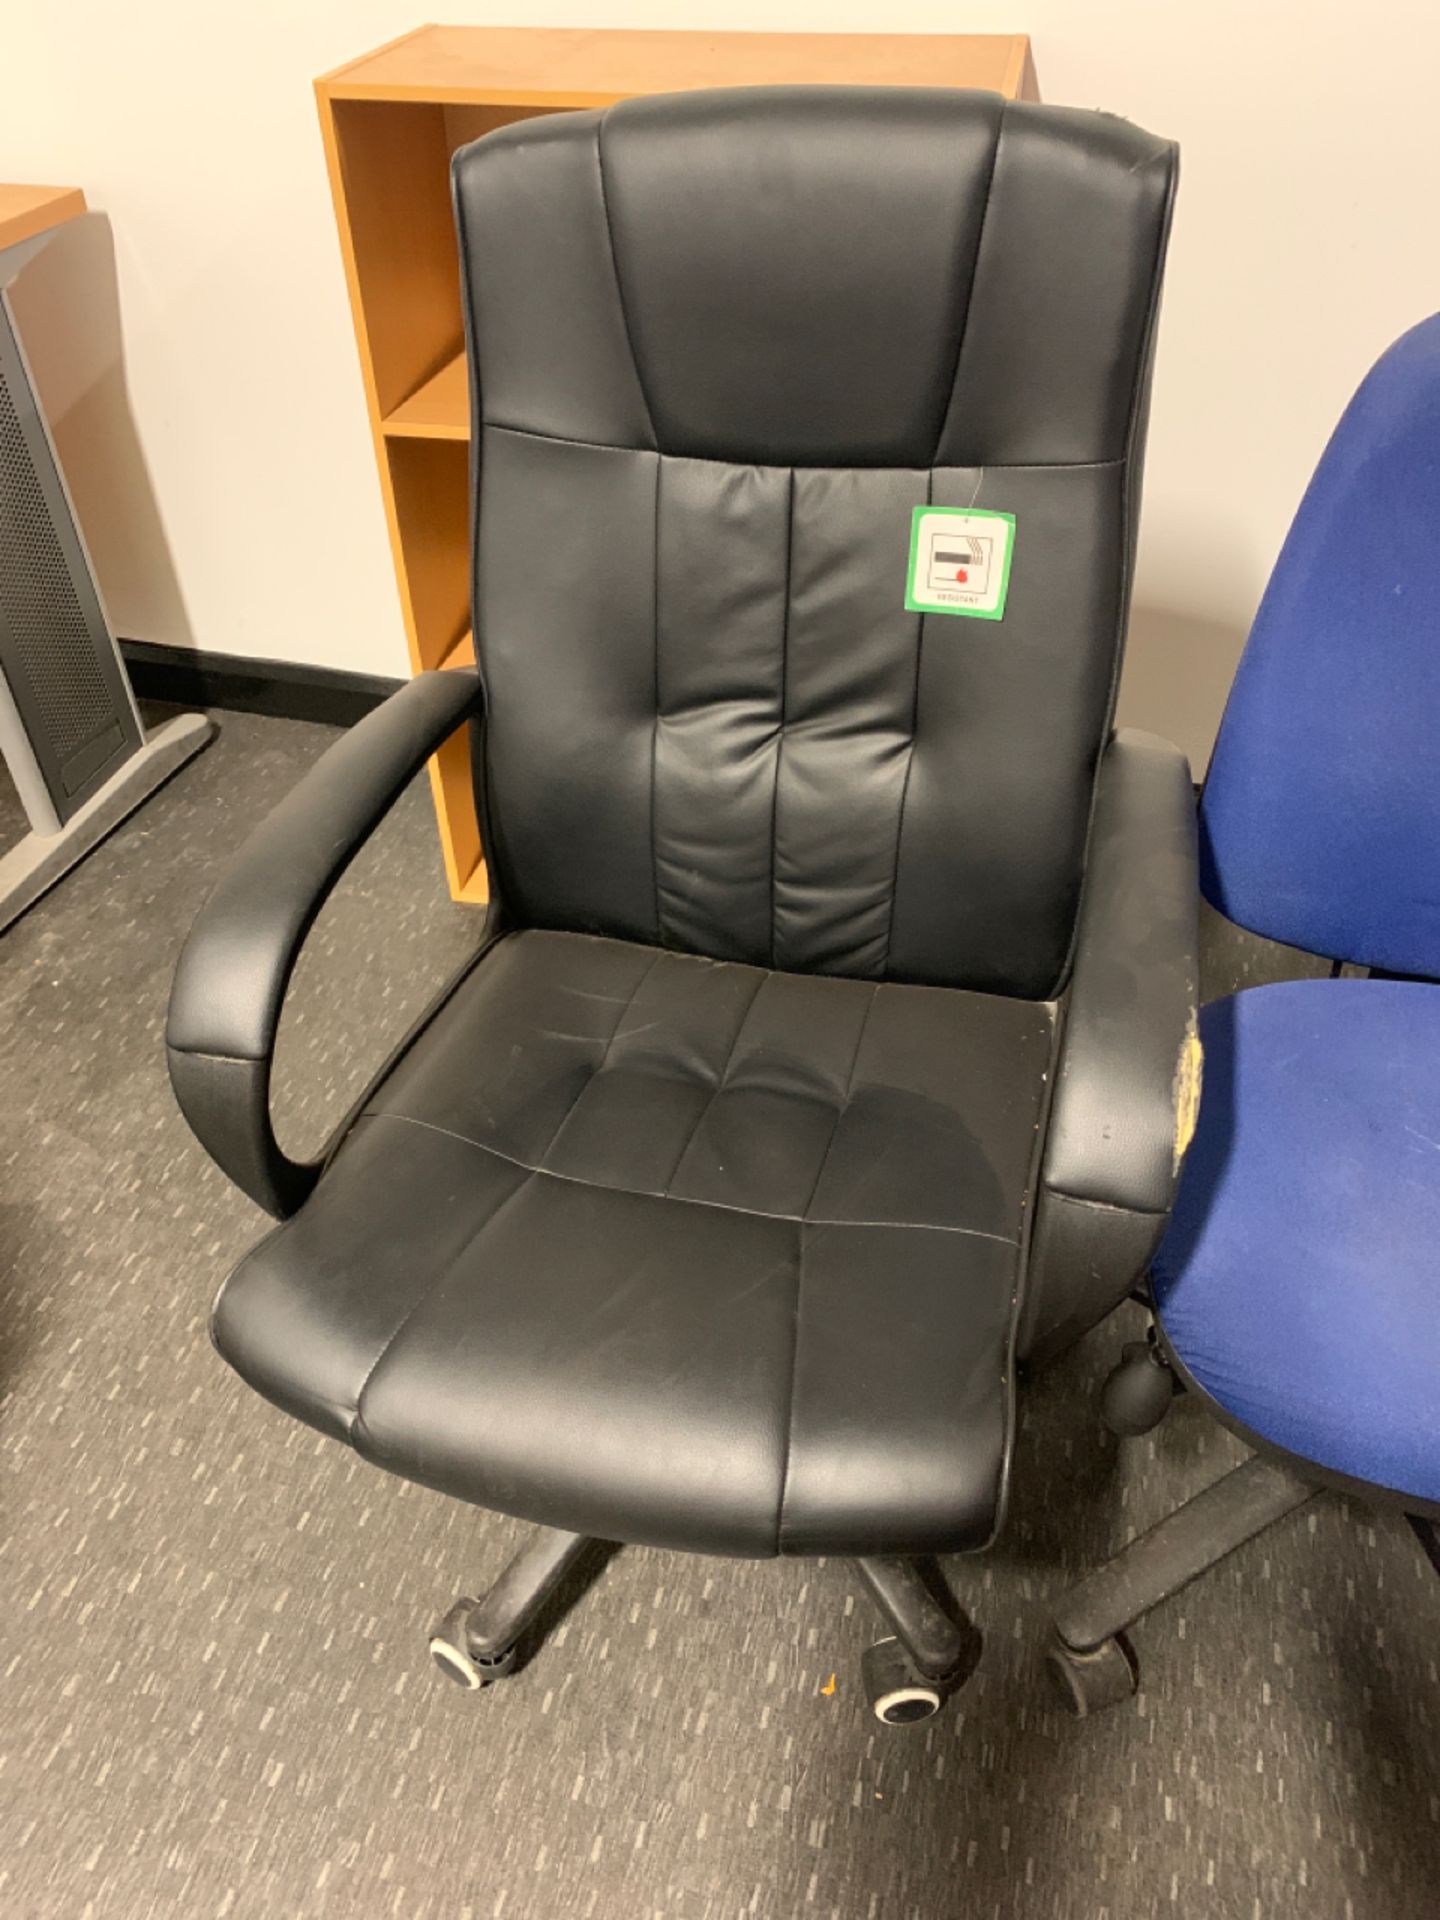 Set of 3 Mobile Office Chairs - Image 2 of 7